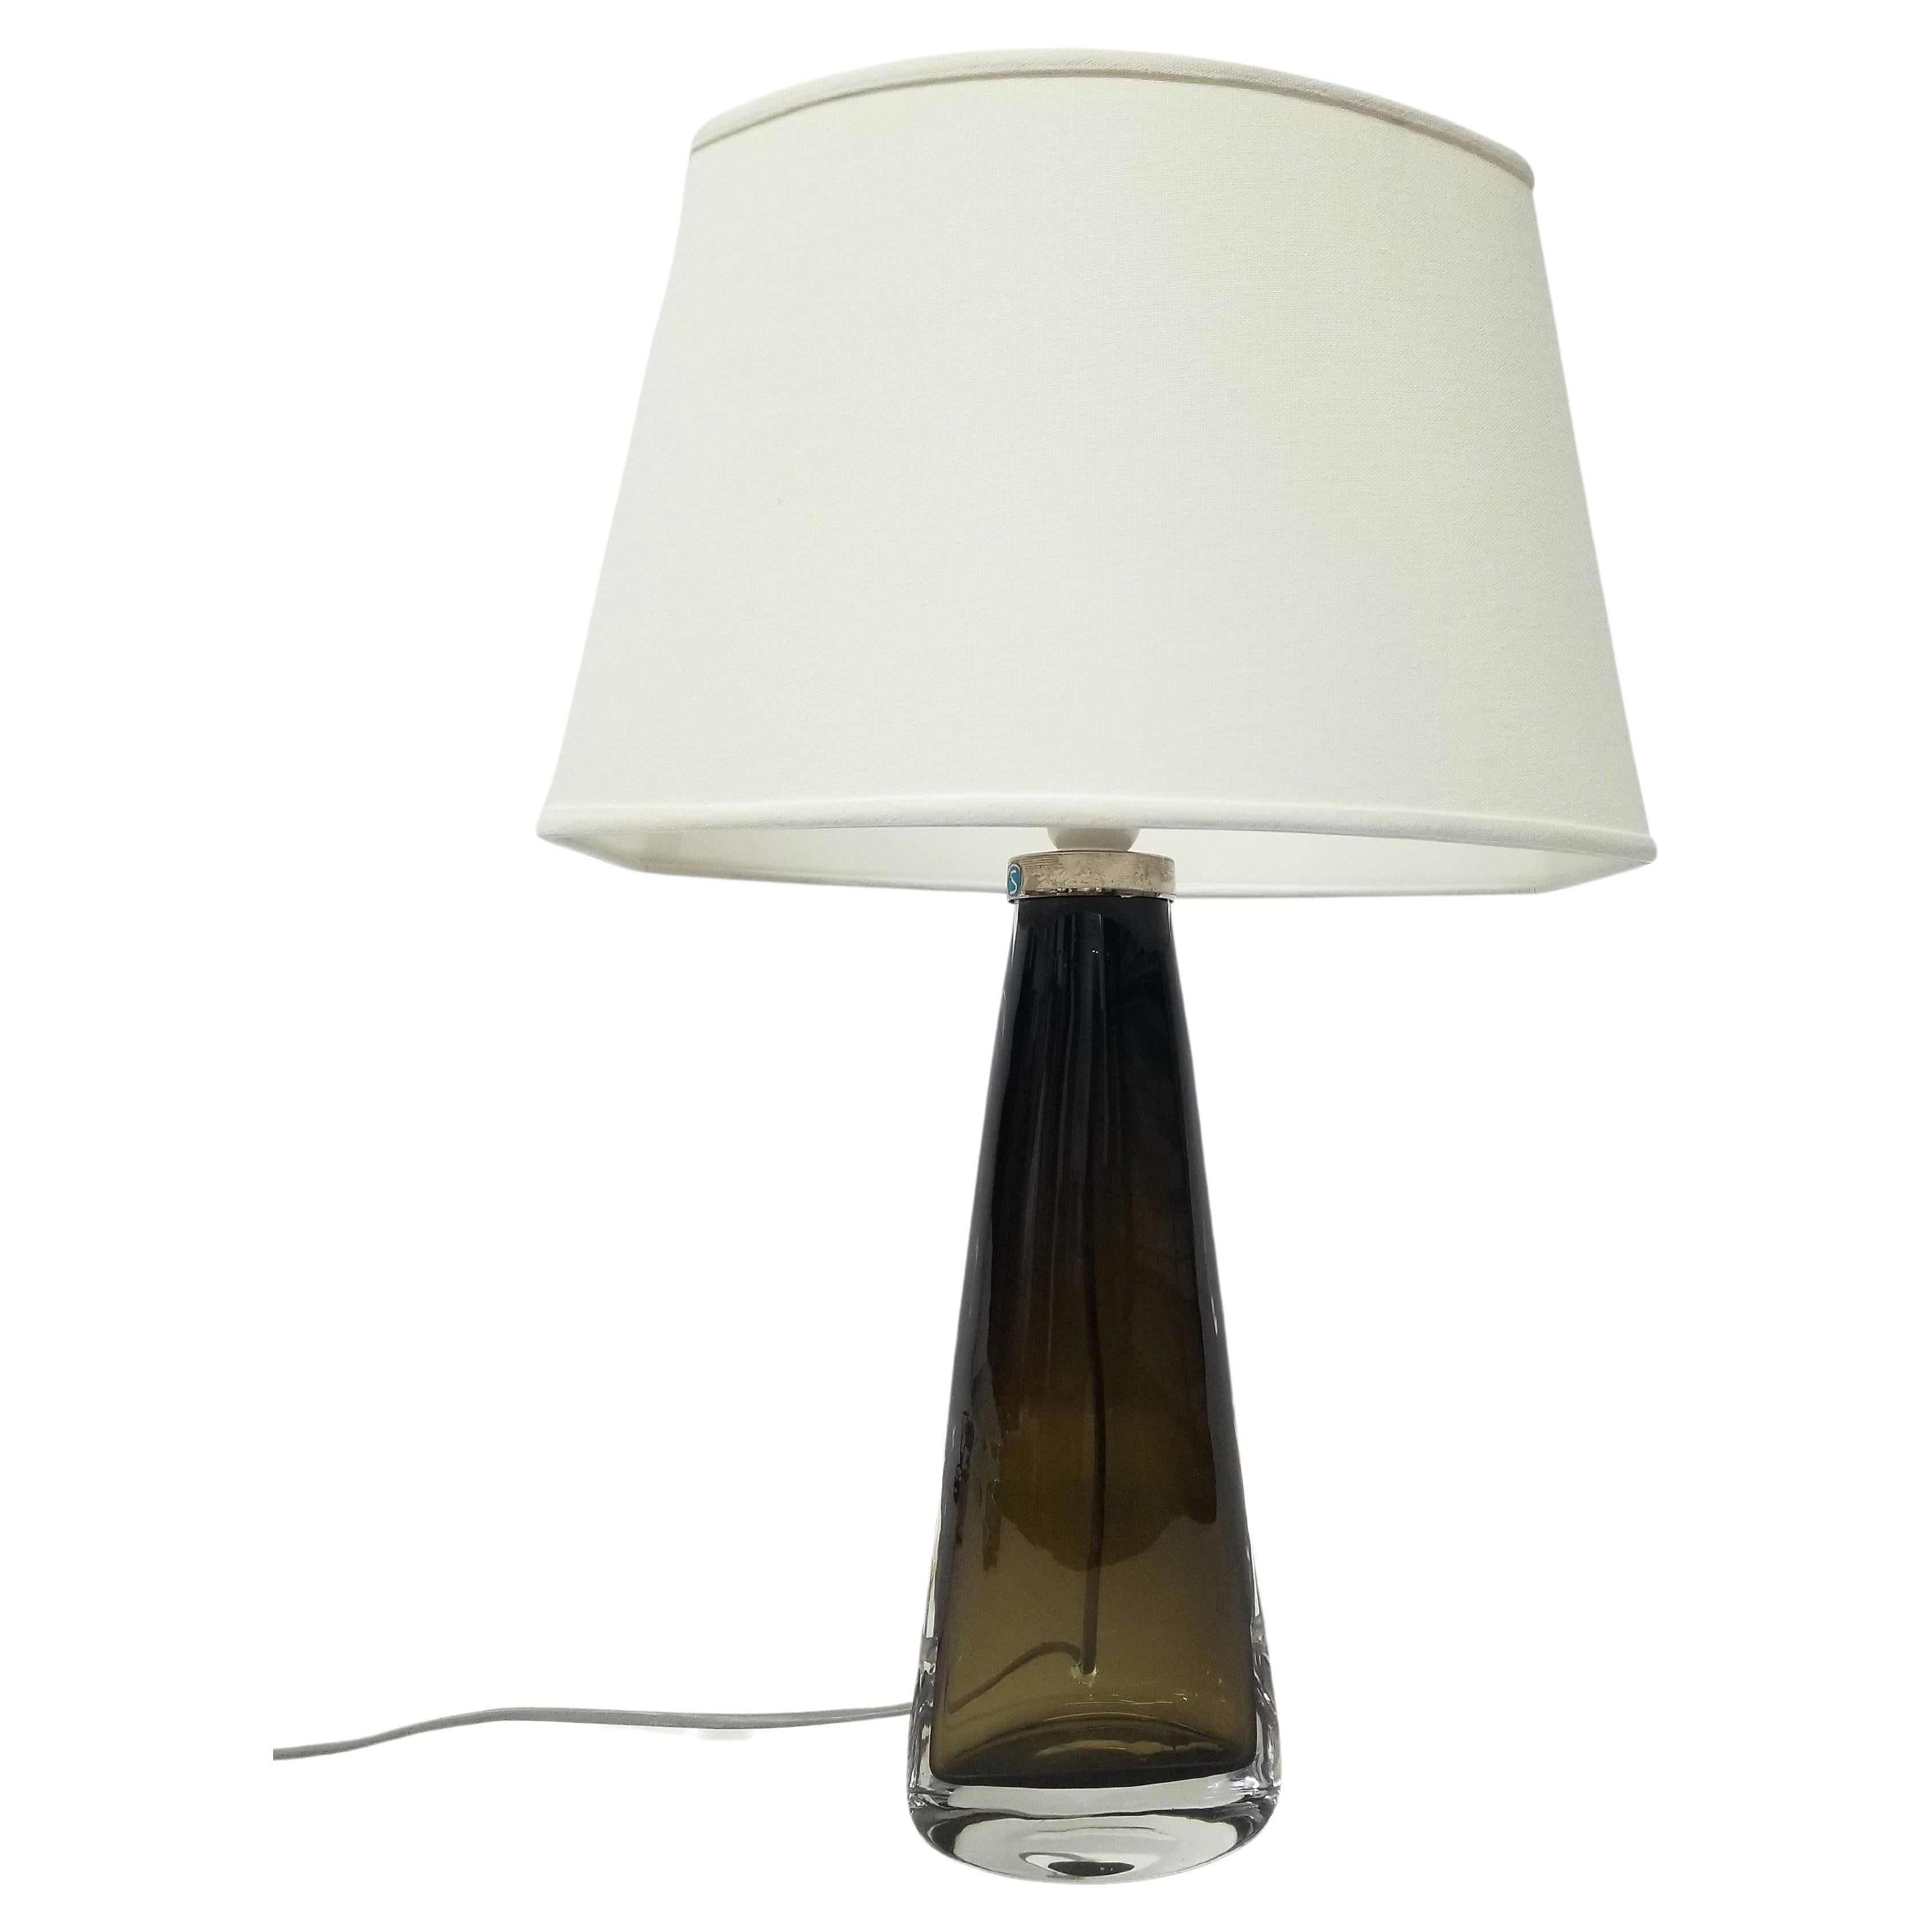 Orrefors Glass Lamp by Carl Fagerlund For Sale